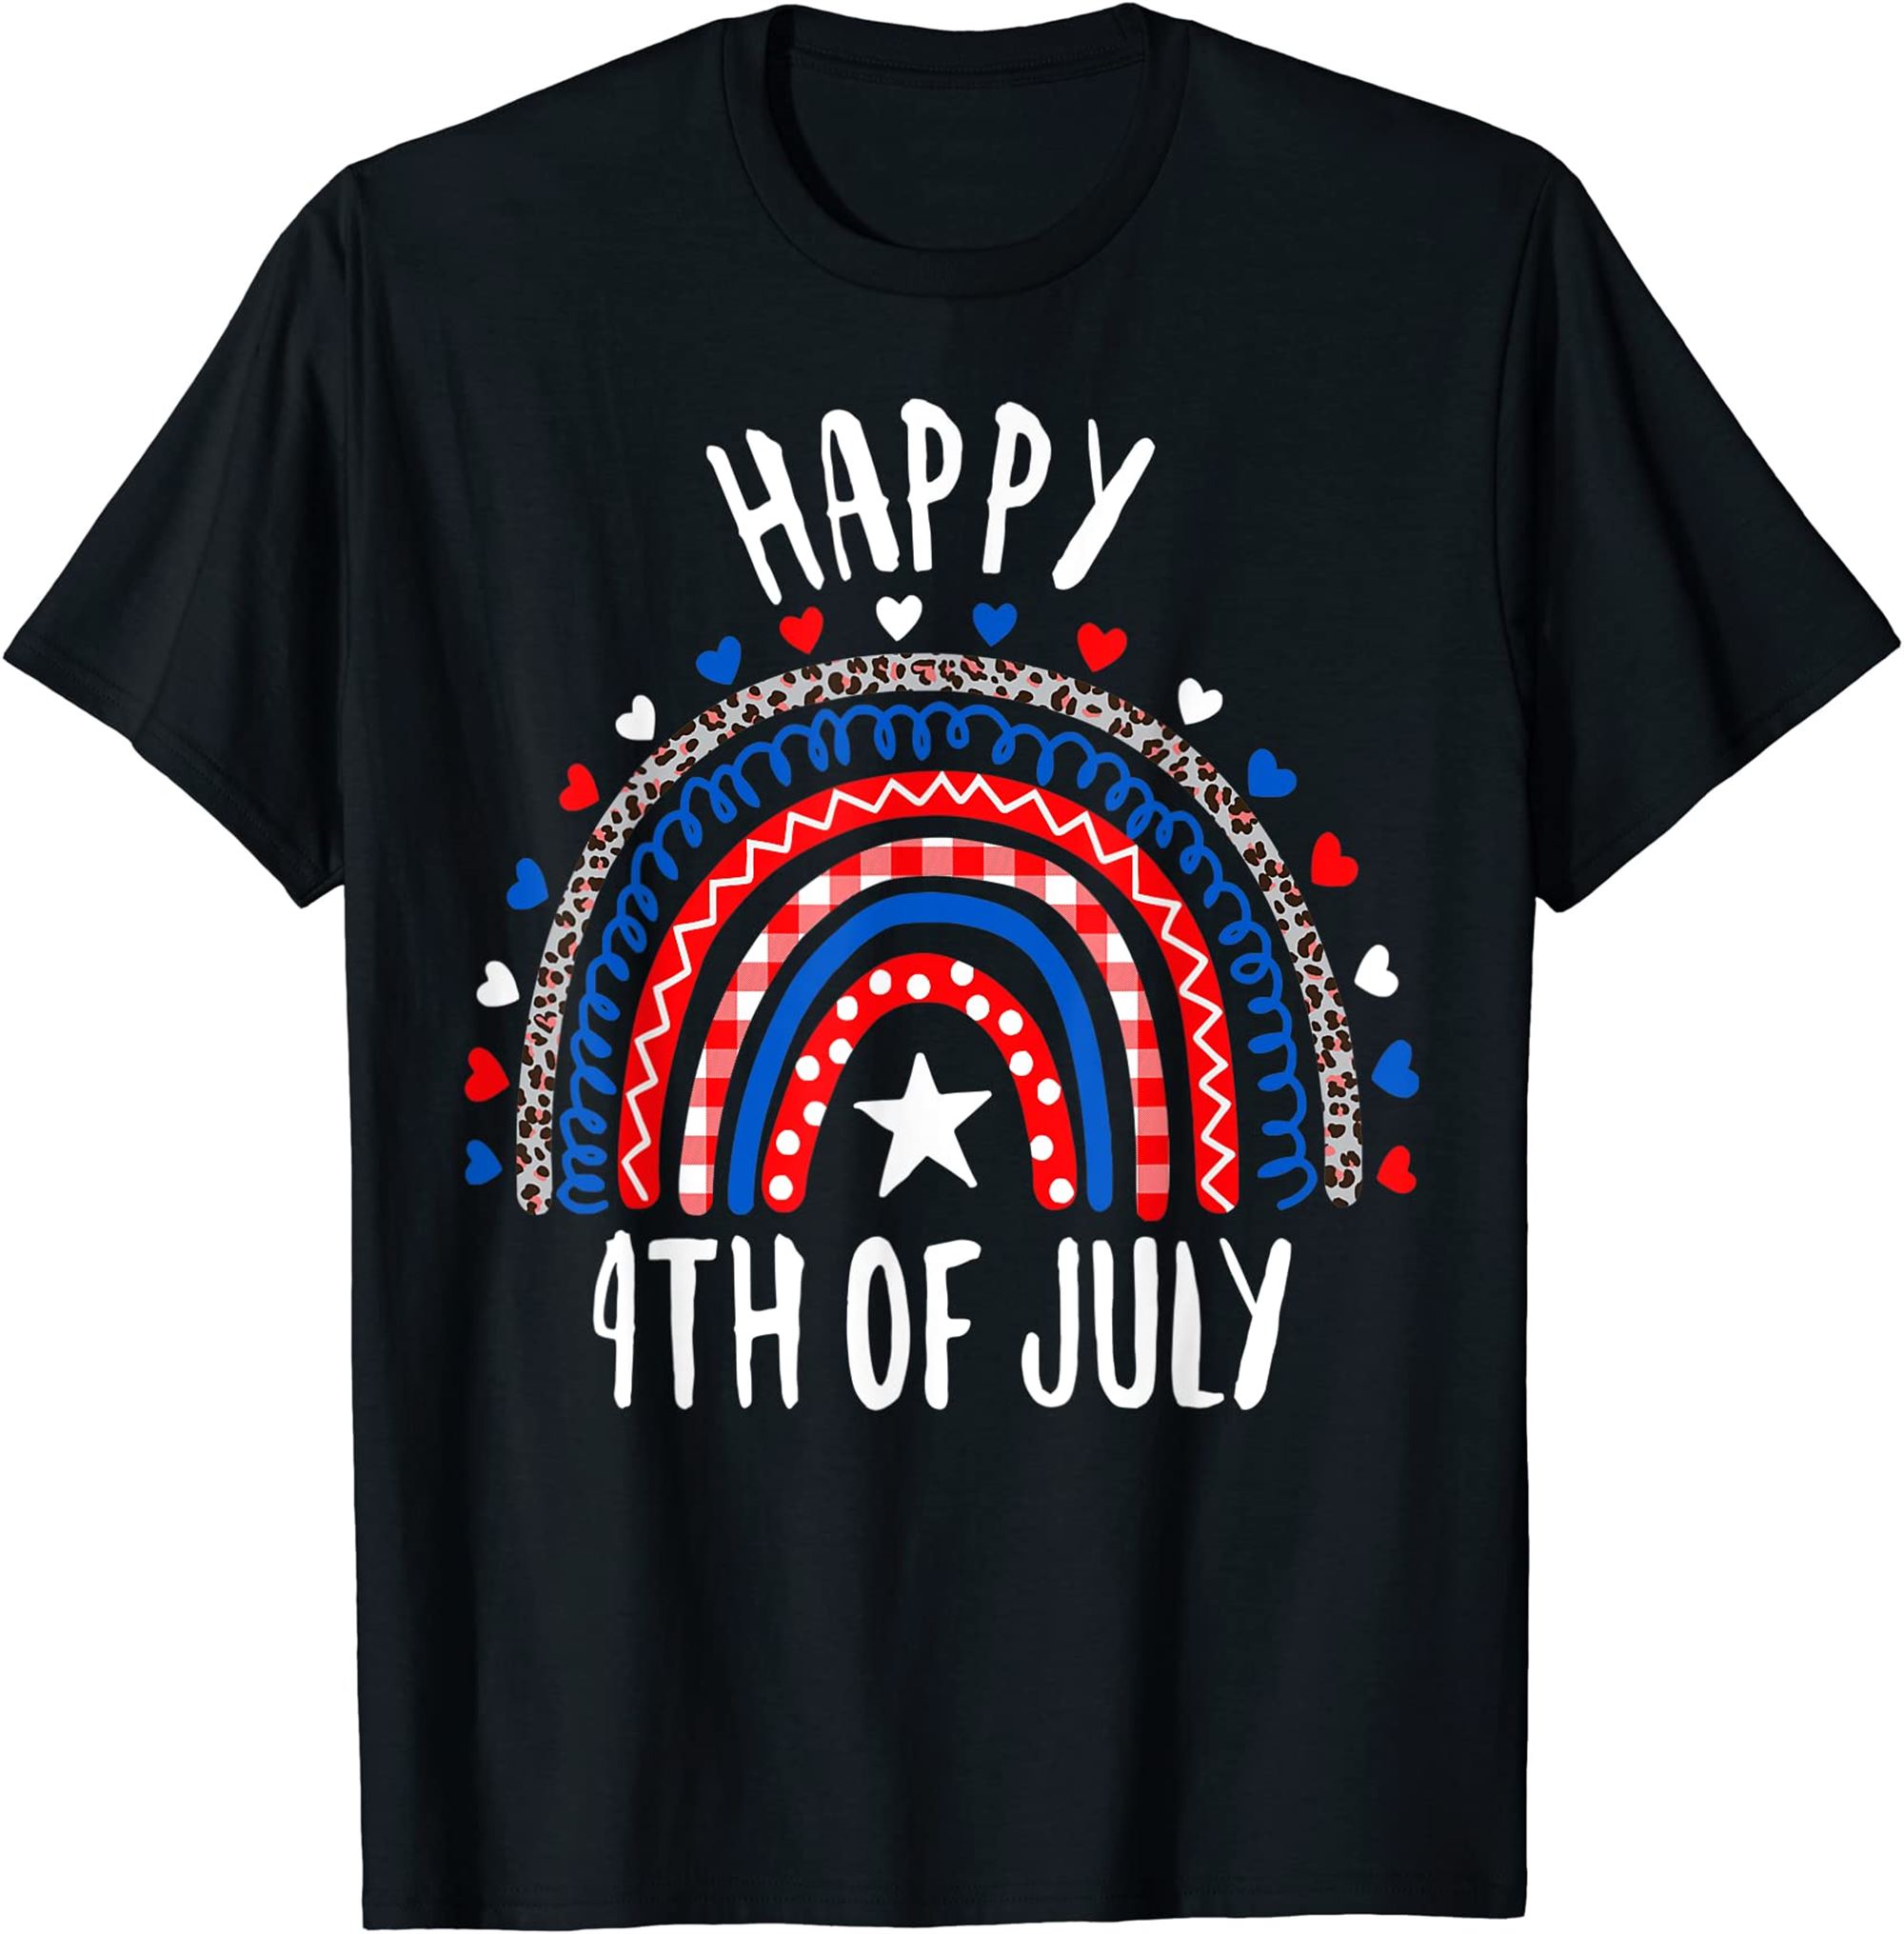 American Flag Rainbow Happy 4th Of July Usa Kids Boys Girls T-shirt Size Up To 5xl